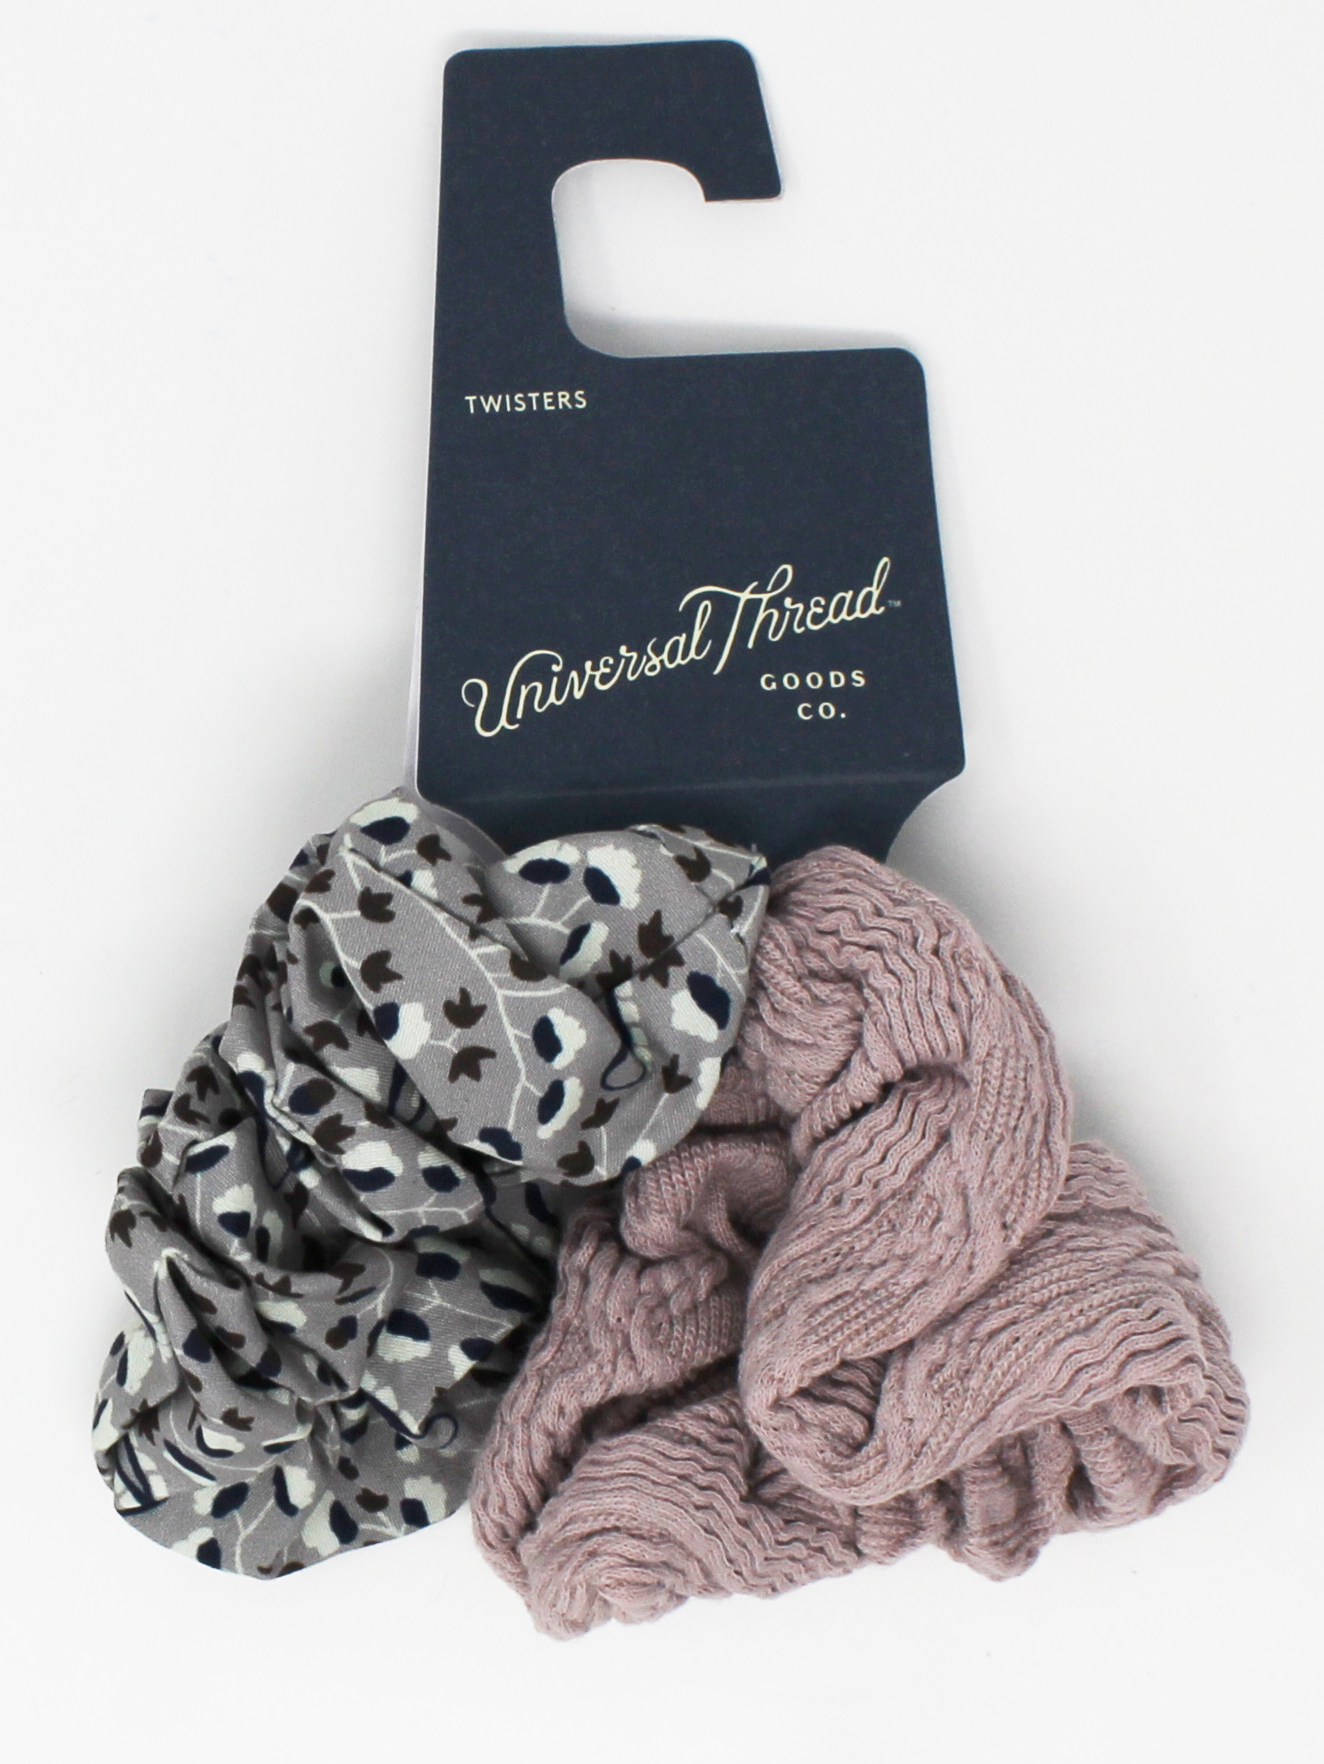 Paisley and Cable Print Twisters - Universal Thread™. Pre-priced $8.00